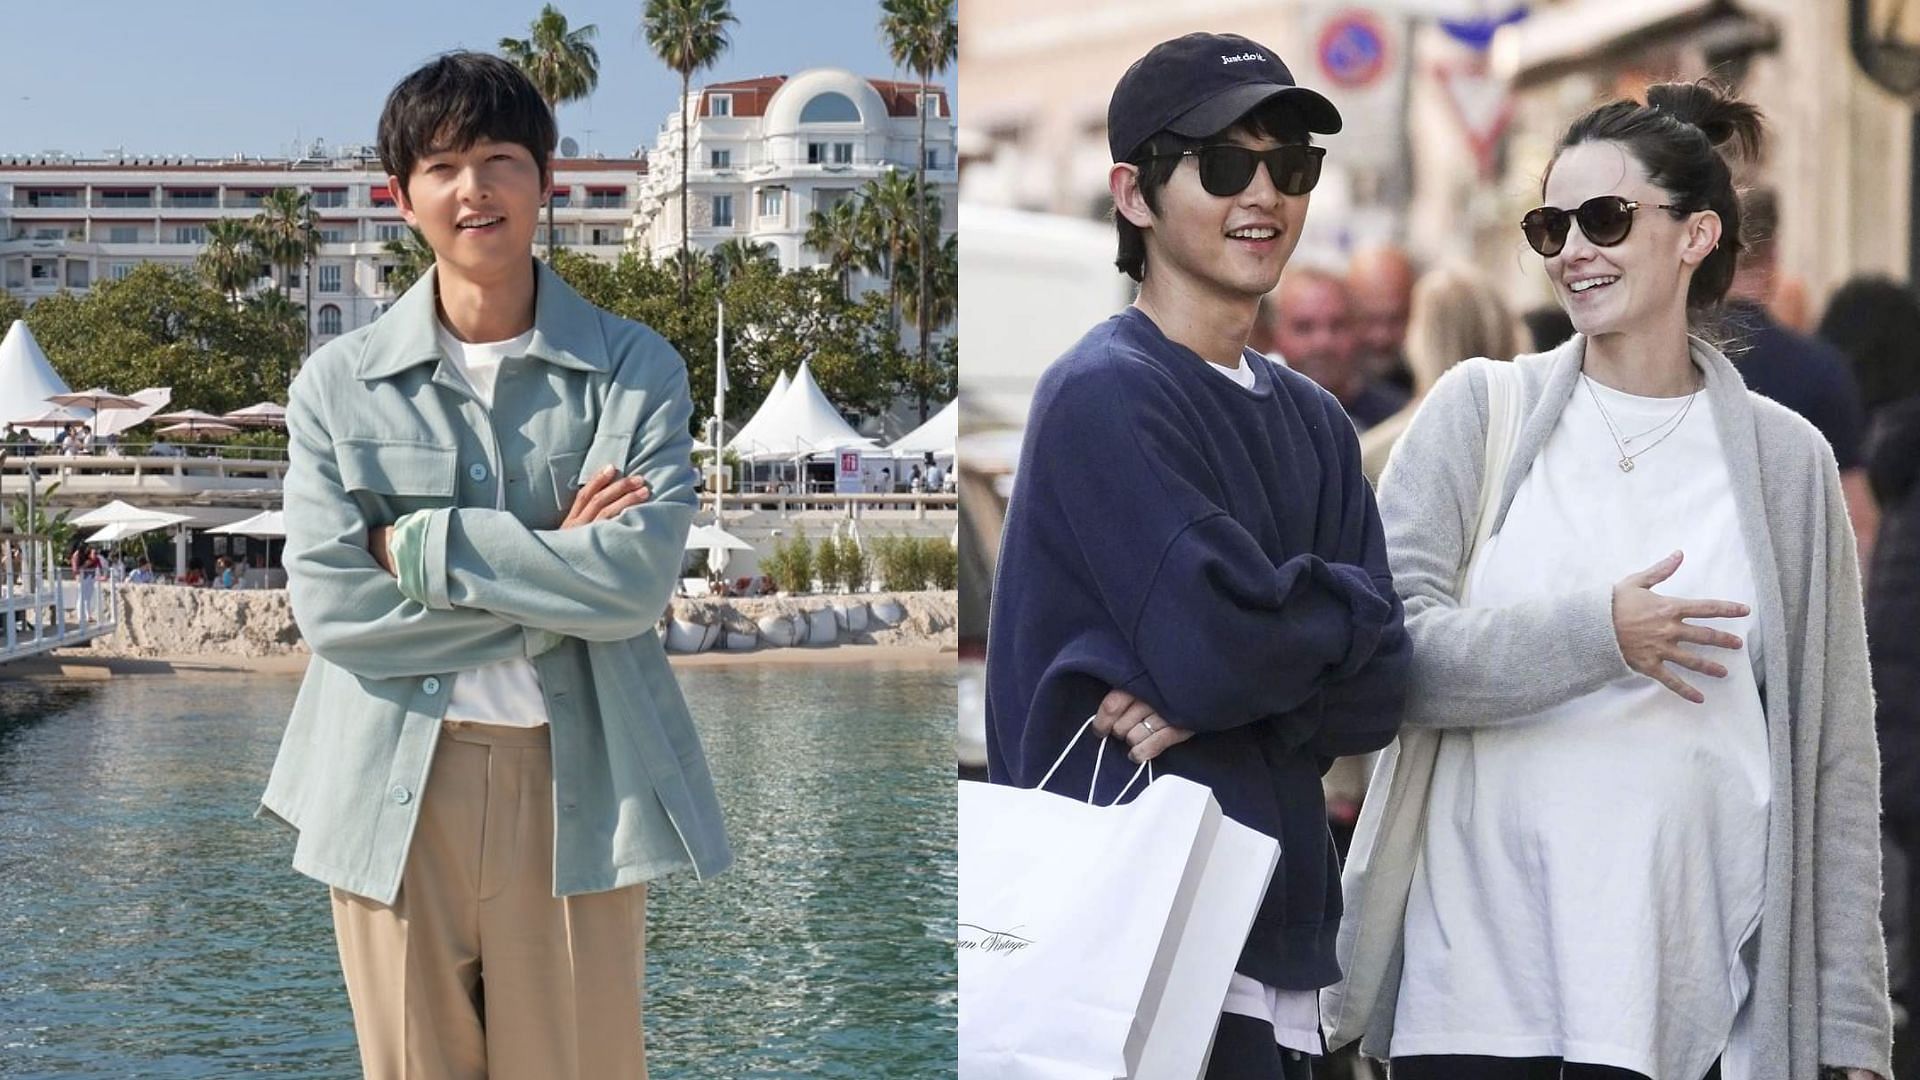 Song Joong-ki will be attending the Cannes Film Festival with wife Katy Louis Sanders (Images via Twitter/JoongKiBrazil)